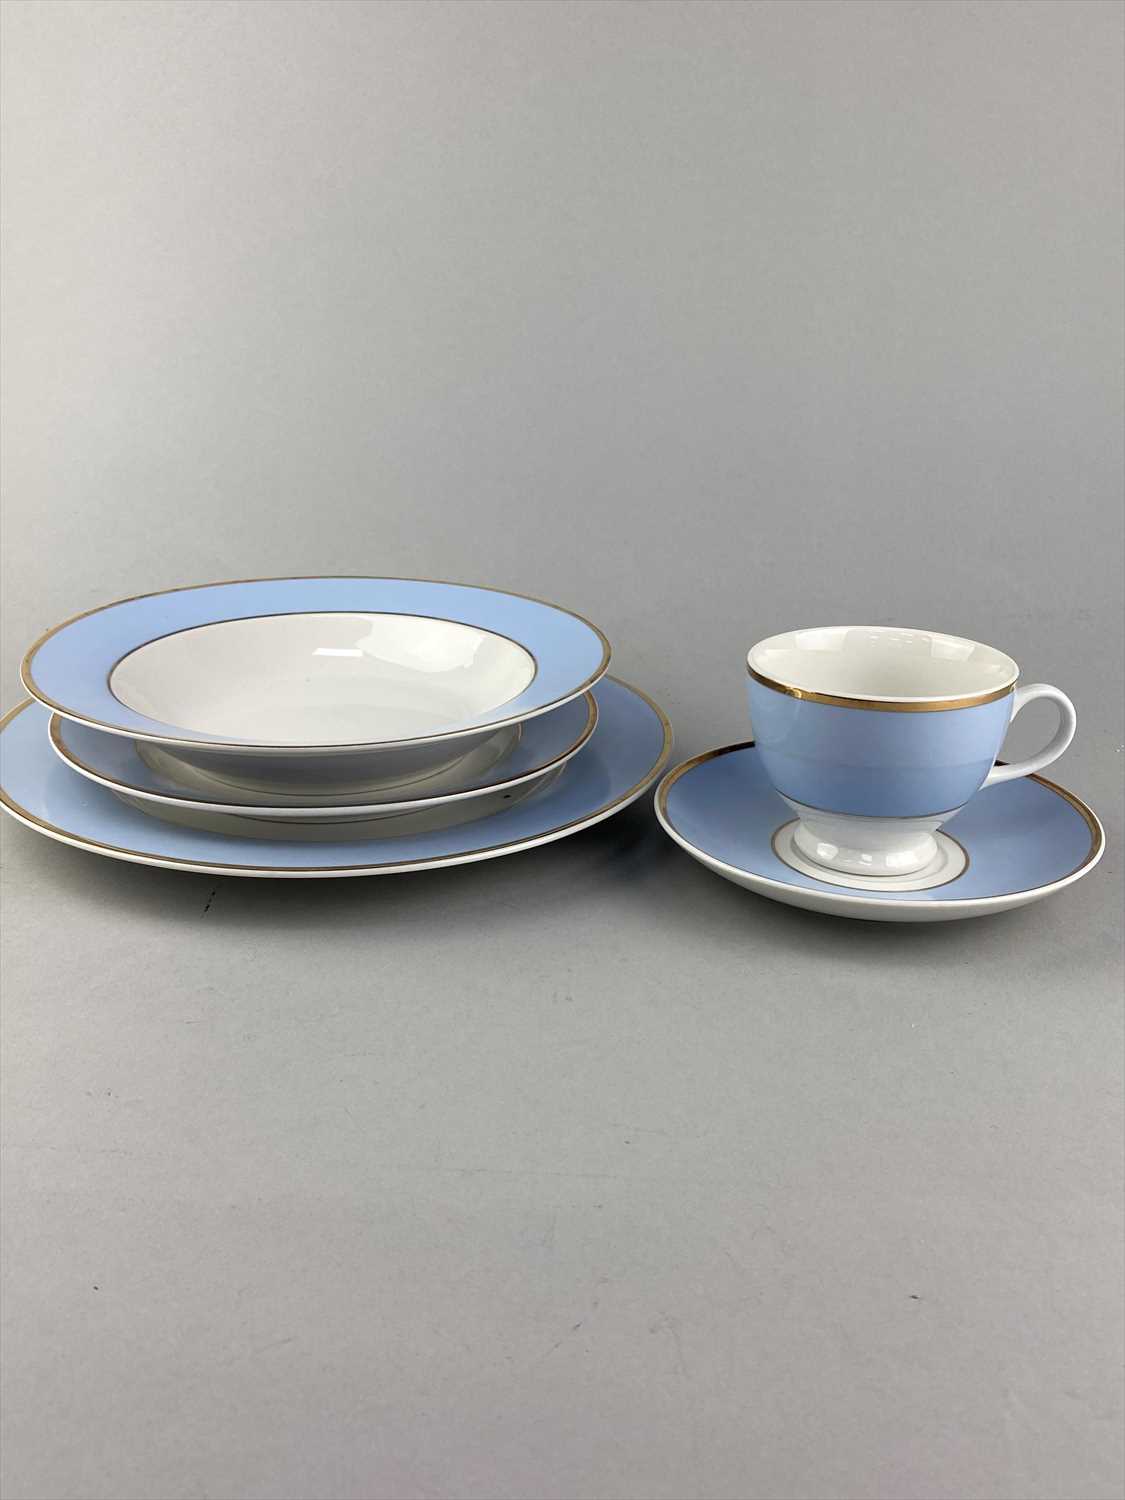 Lot 206 - A DOULTON BLUE, WHITE AND GILT PART DINNER SERVICE AND A NORITAKE PART TEA SERVICE